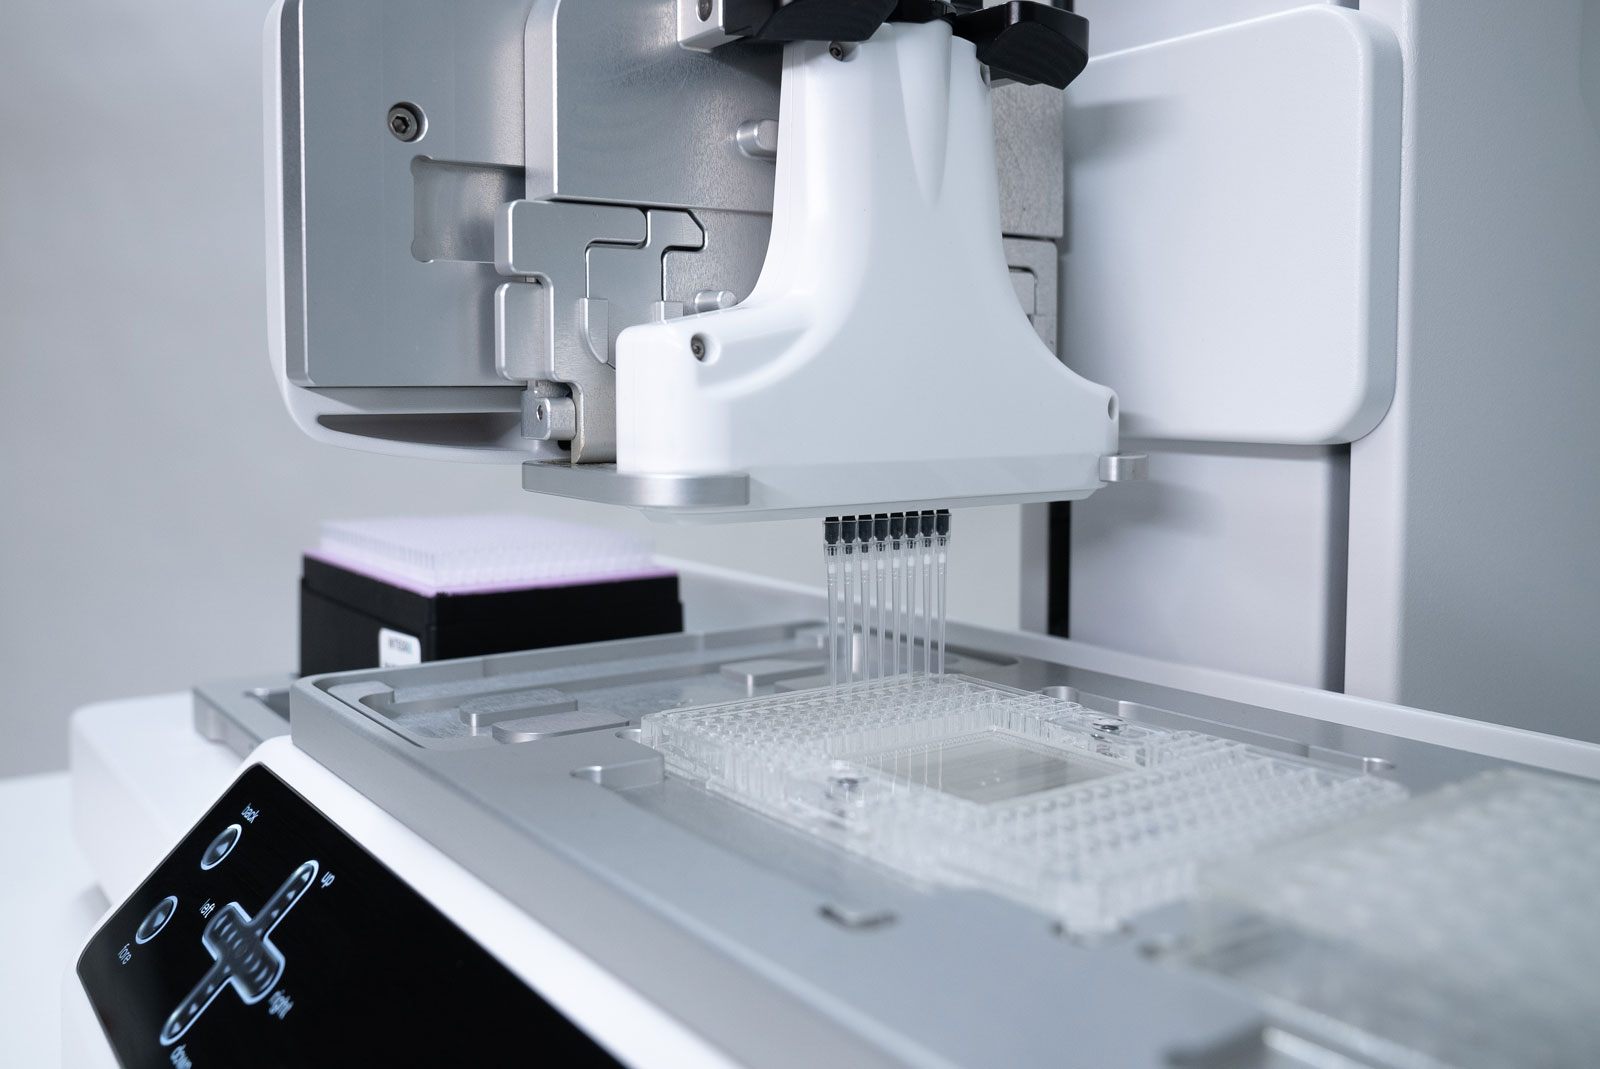 Sample loading on the Fluidigm 192.24 Dynamic Array IFC with INTEGRA's ASSIST PLUS pipetting robot and the VOYAGER automatic tip spacing electronic pipette. 